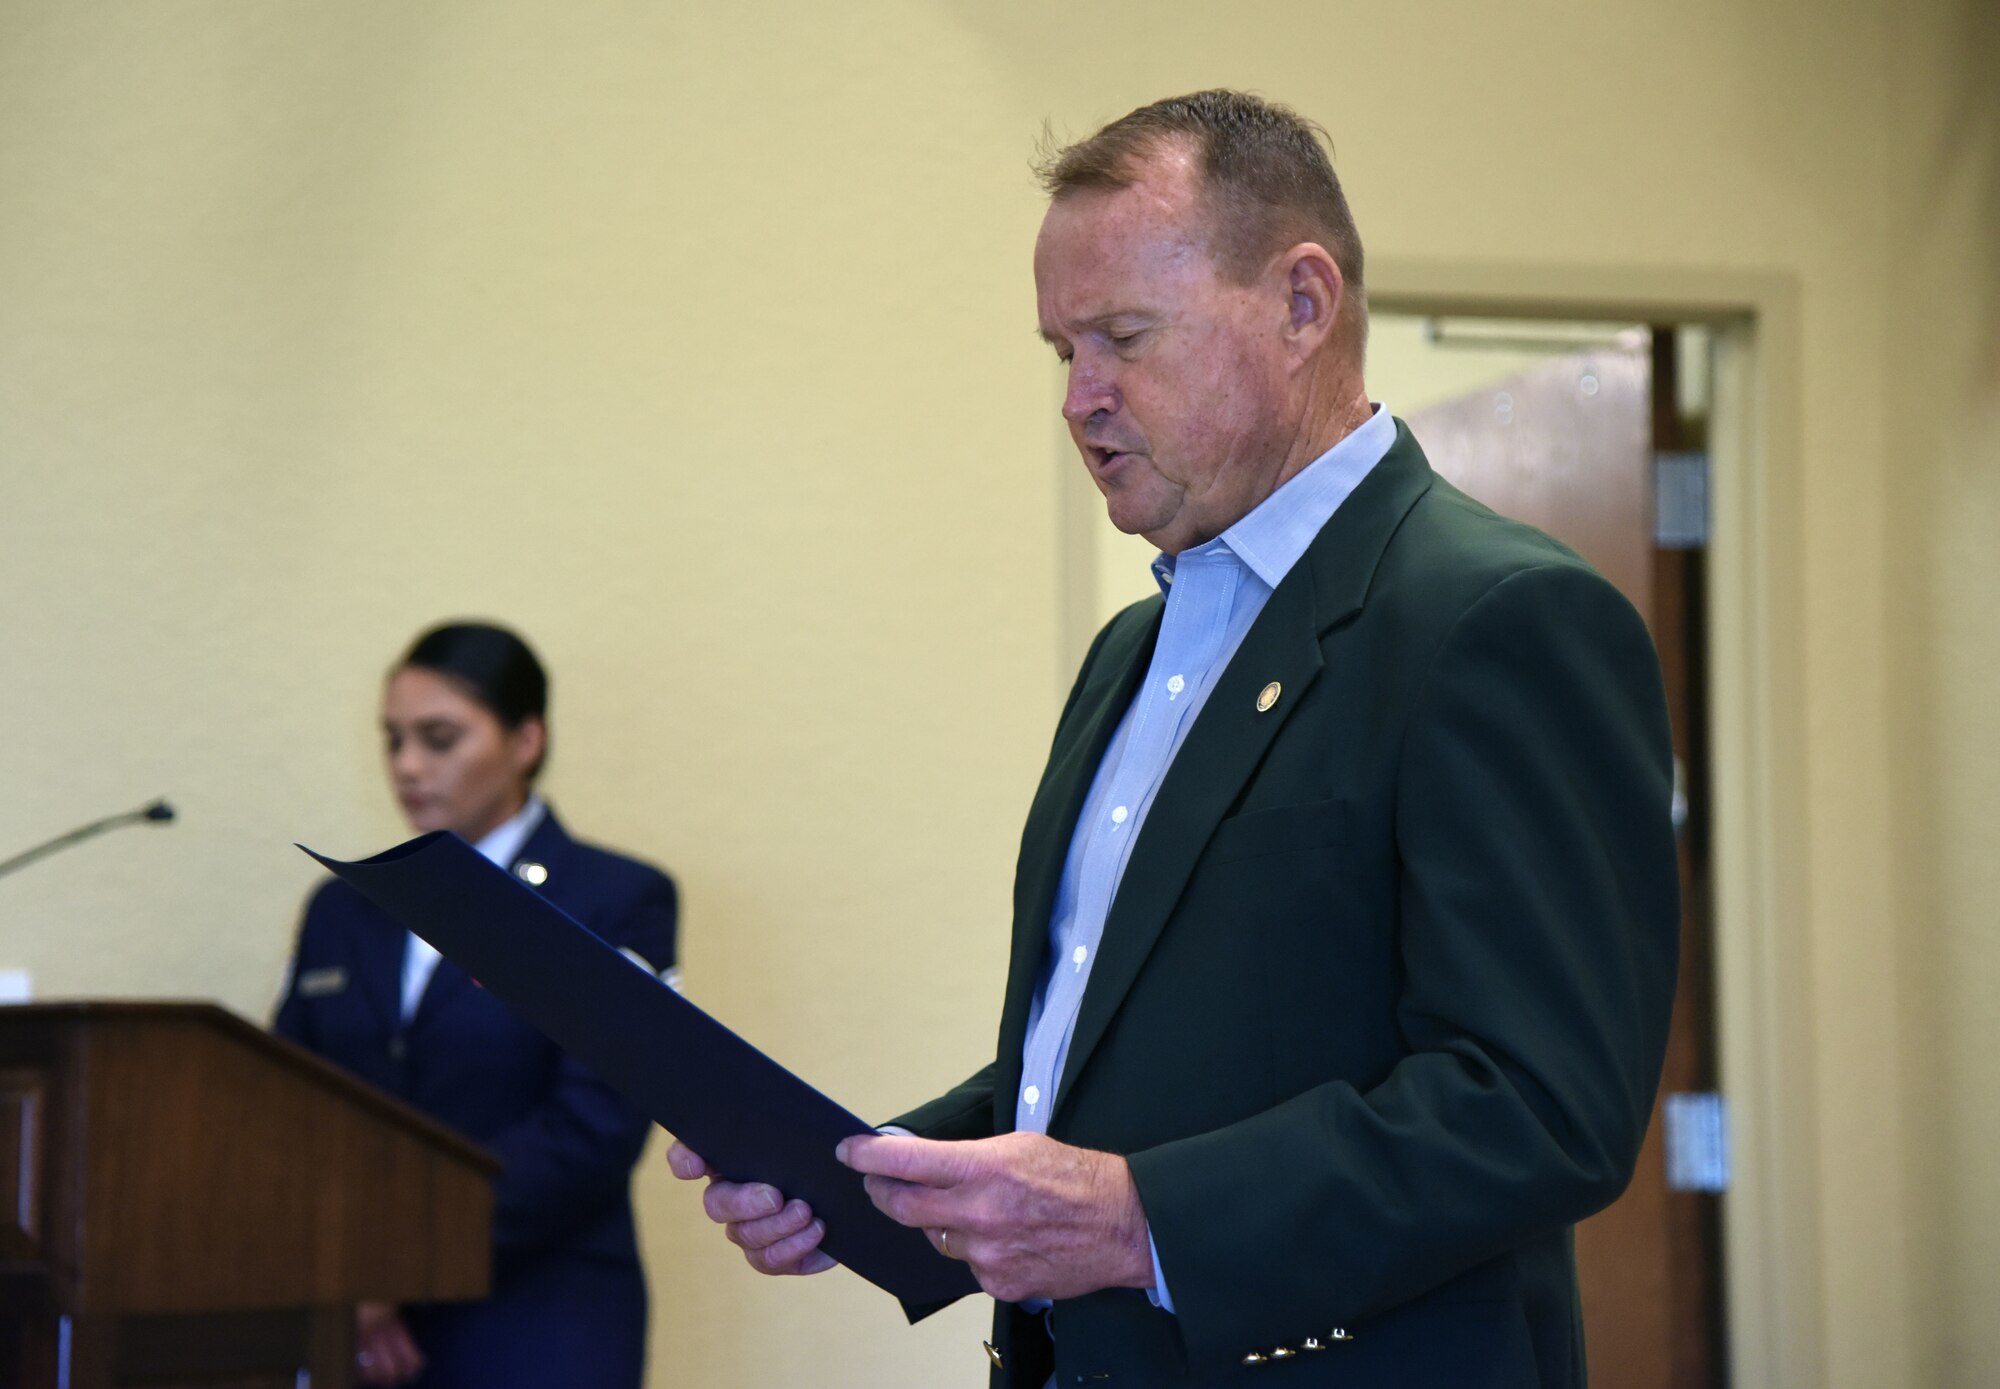 Mike Leonard, Biloxi city administrator, reads a "Prisoner Of War and Missing In Action Remembrance Day in the City of Biloxi" proclamation during the POW/MIA Remembrance Luncheon at the Bay Breeze Event Center at Keesler Air Force Base, Mississippi, Sept. 21, 2018.The event, hosted by the Air Force Sergeants Association, was held to raise awareness and to pay tribute to all prisoners of war and those military members still missing in action. (U.S. Air Force photo by Kemberly Groue)